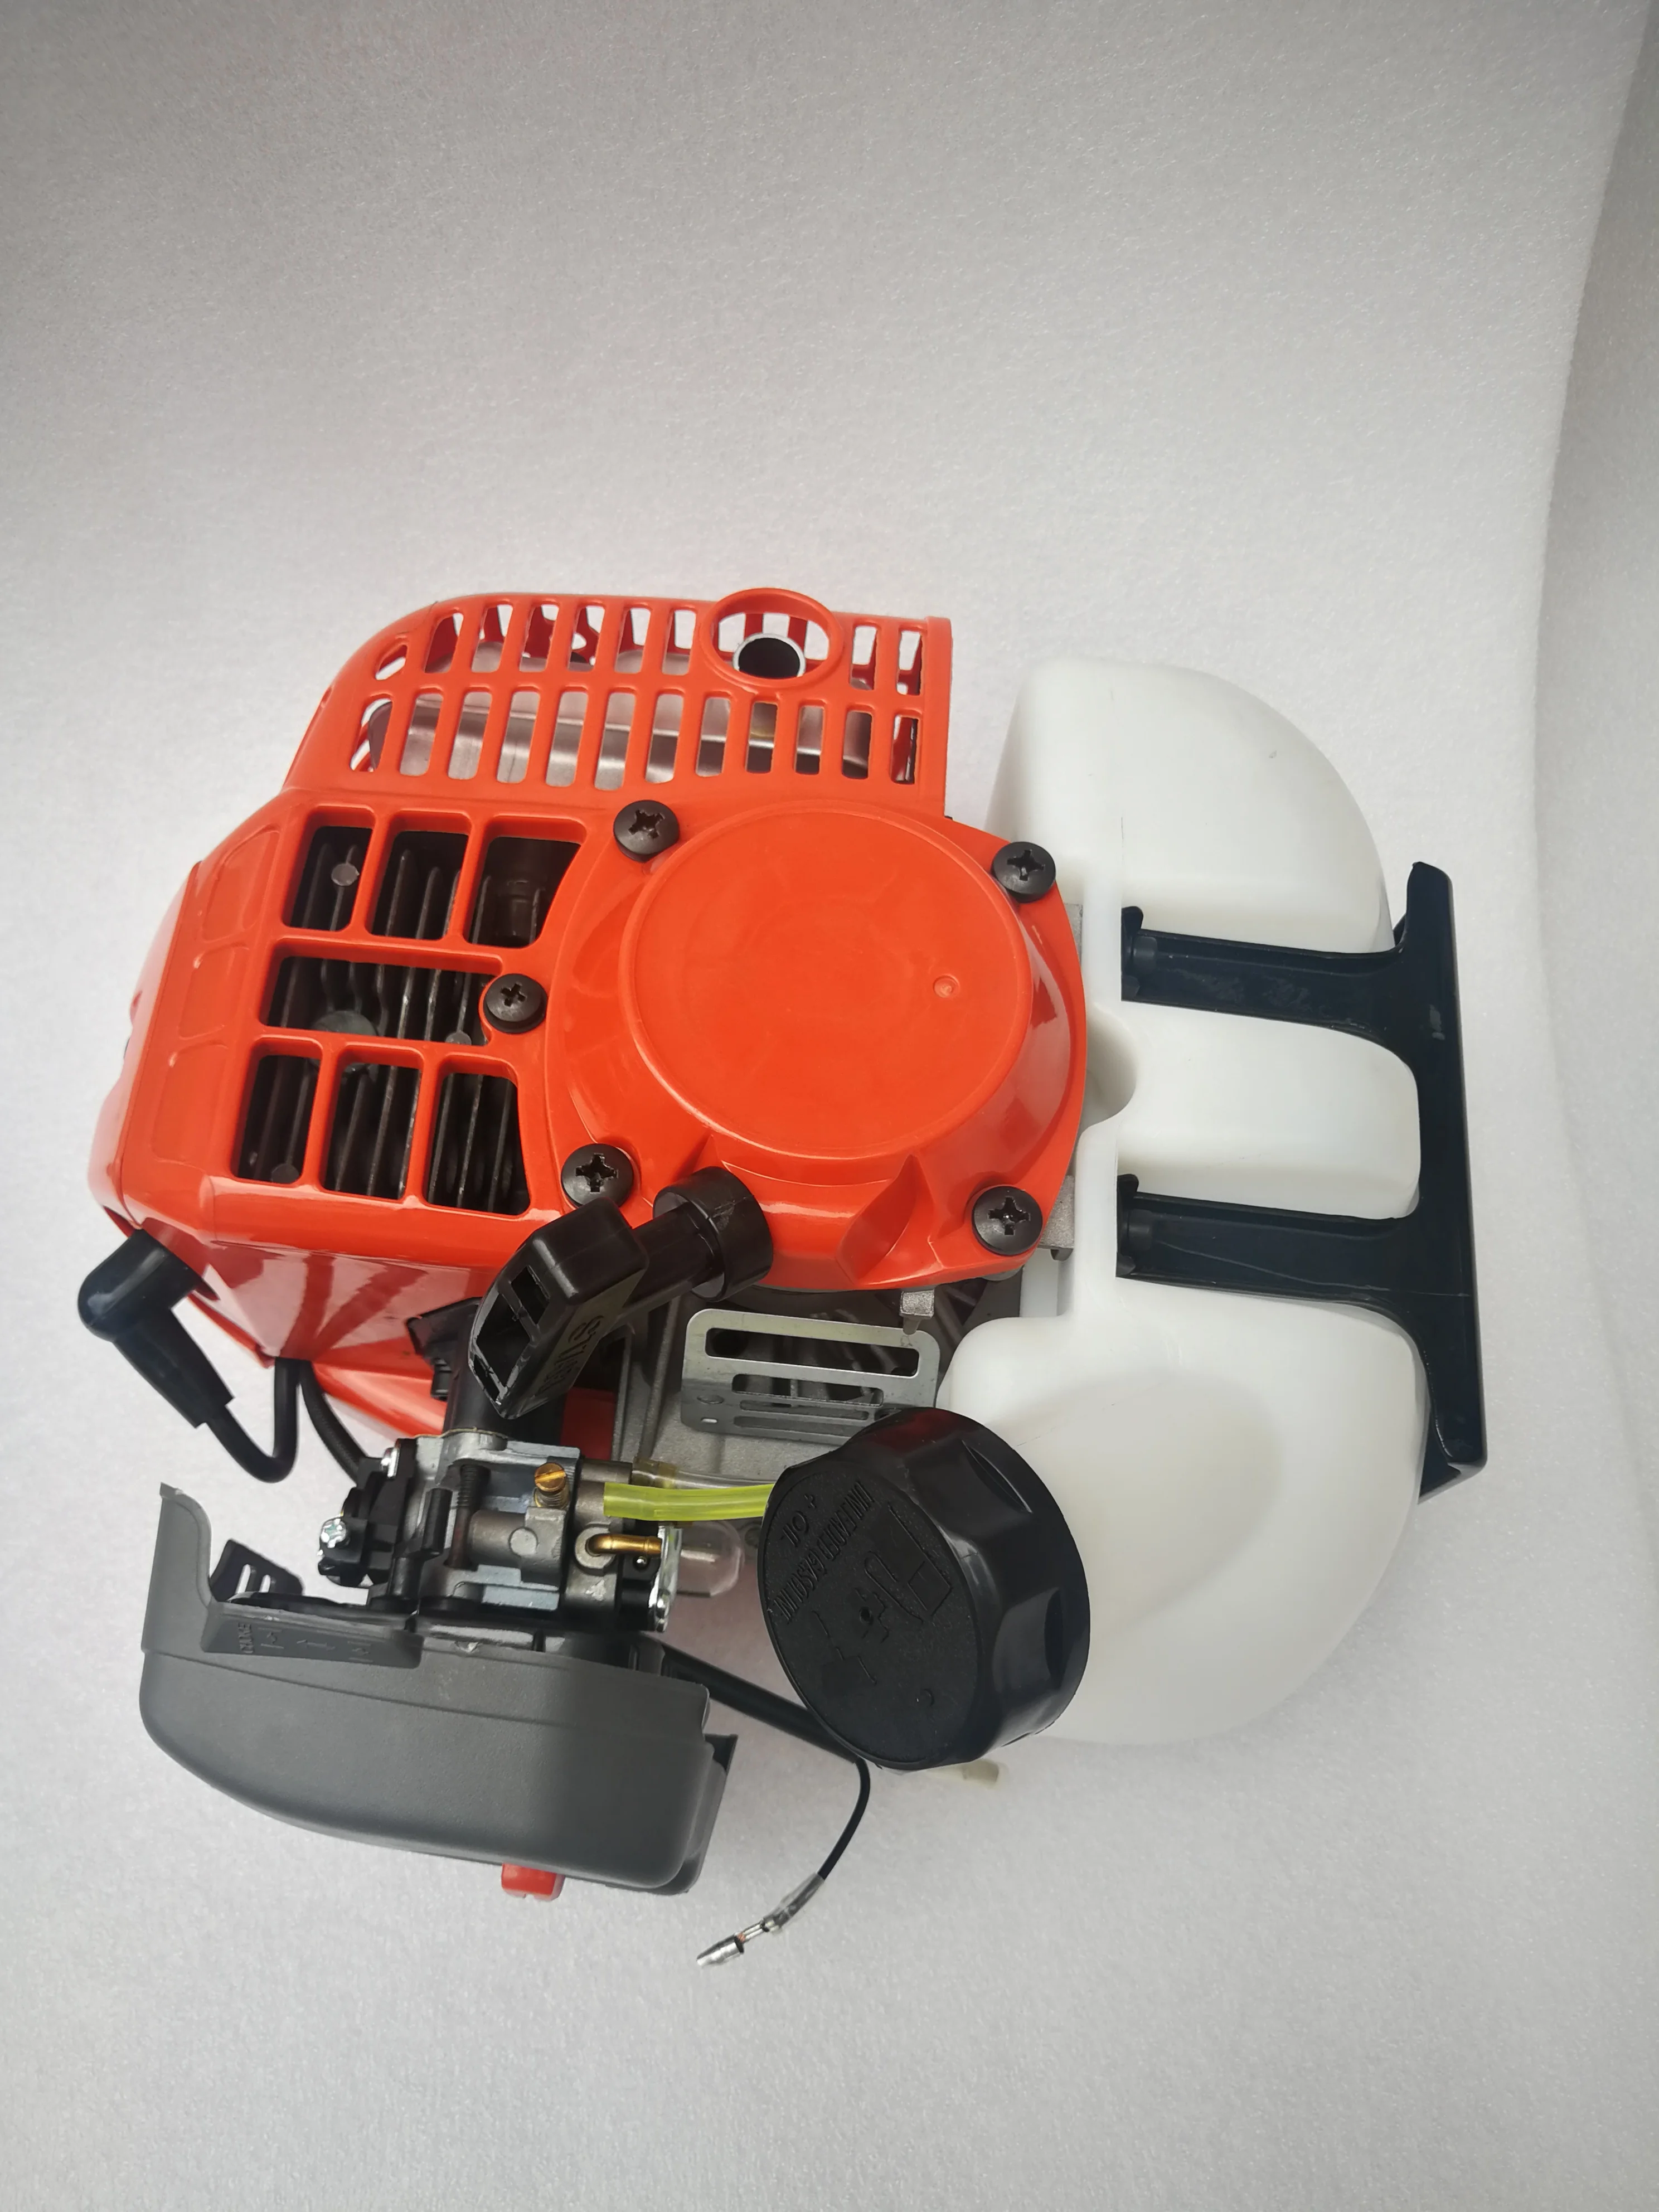 2T Power Engine G45L For Grass Trimmer Brush Cutter 443R,Bc4310,Gas Bc3410 Motor Powerful enlarge